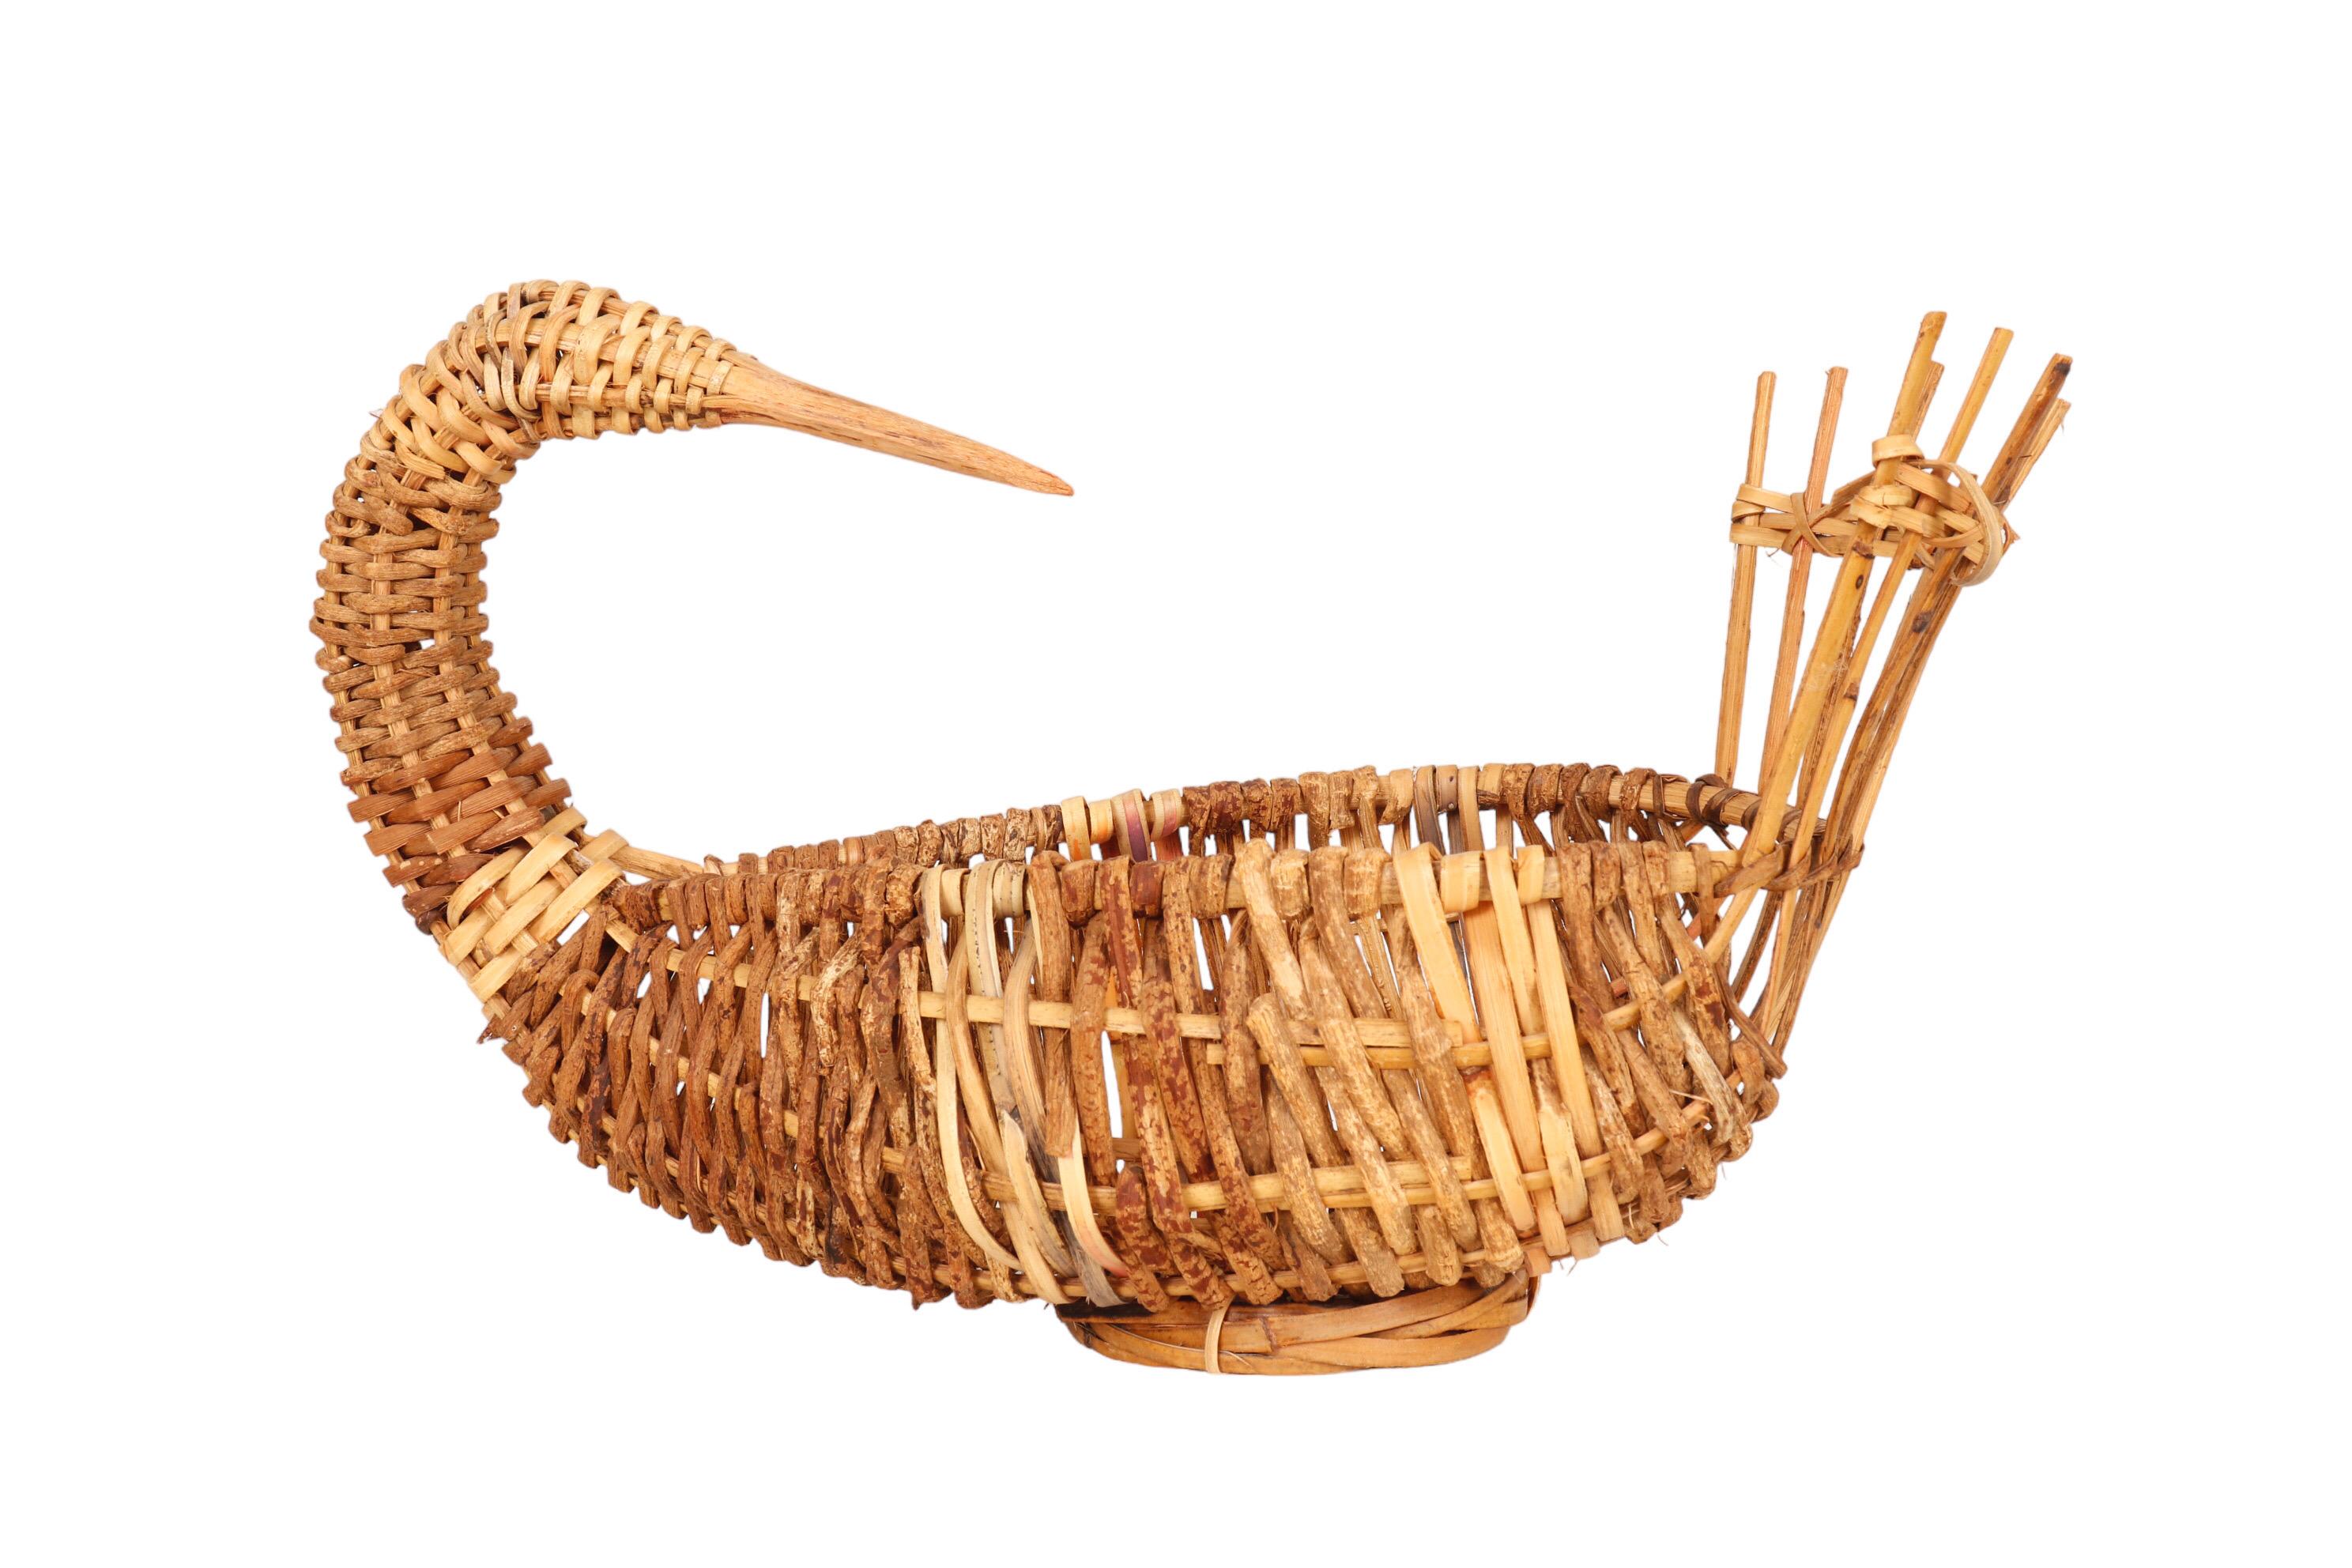 A woven rattan basket shaped like a goose. A long neck curves around and turns back to face long raised feathers. A beak is formed from where the rattan joins into a single piece, and lighter bands decorated the neck and body. Inside are strands of